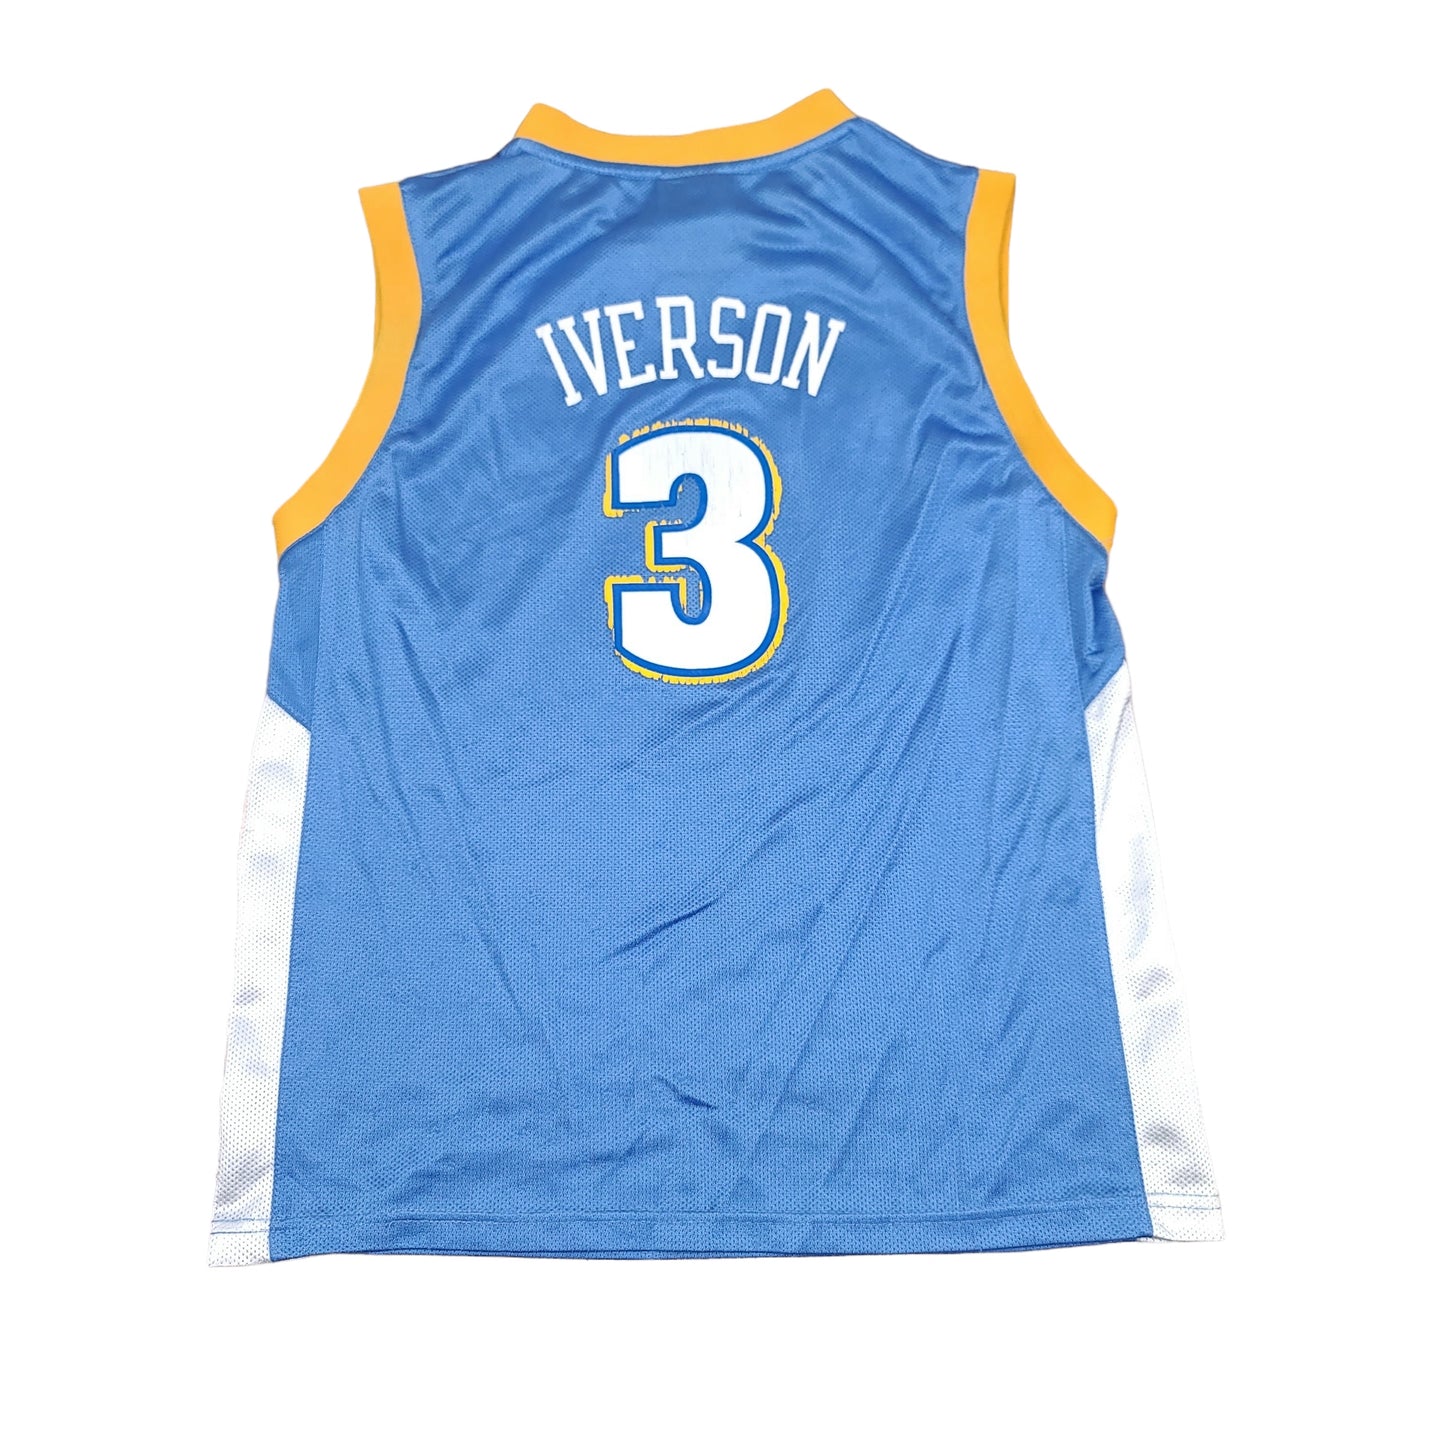 Allen Iverson Denver Nuggets Blue adidas Youth Jersey